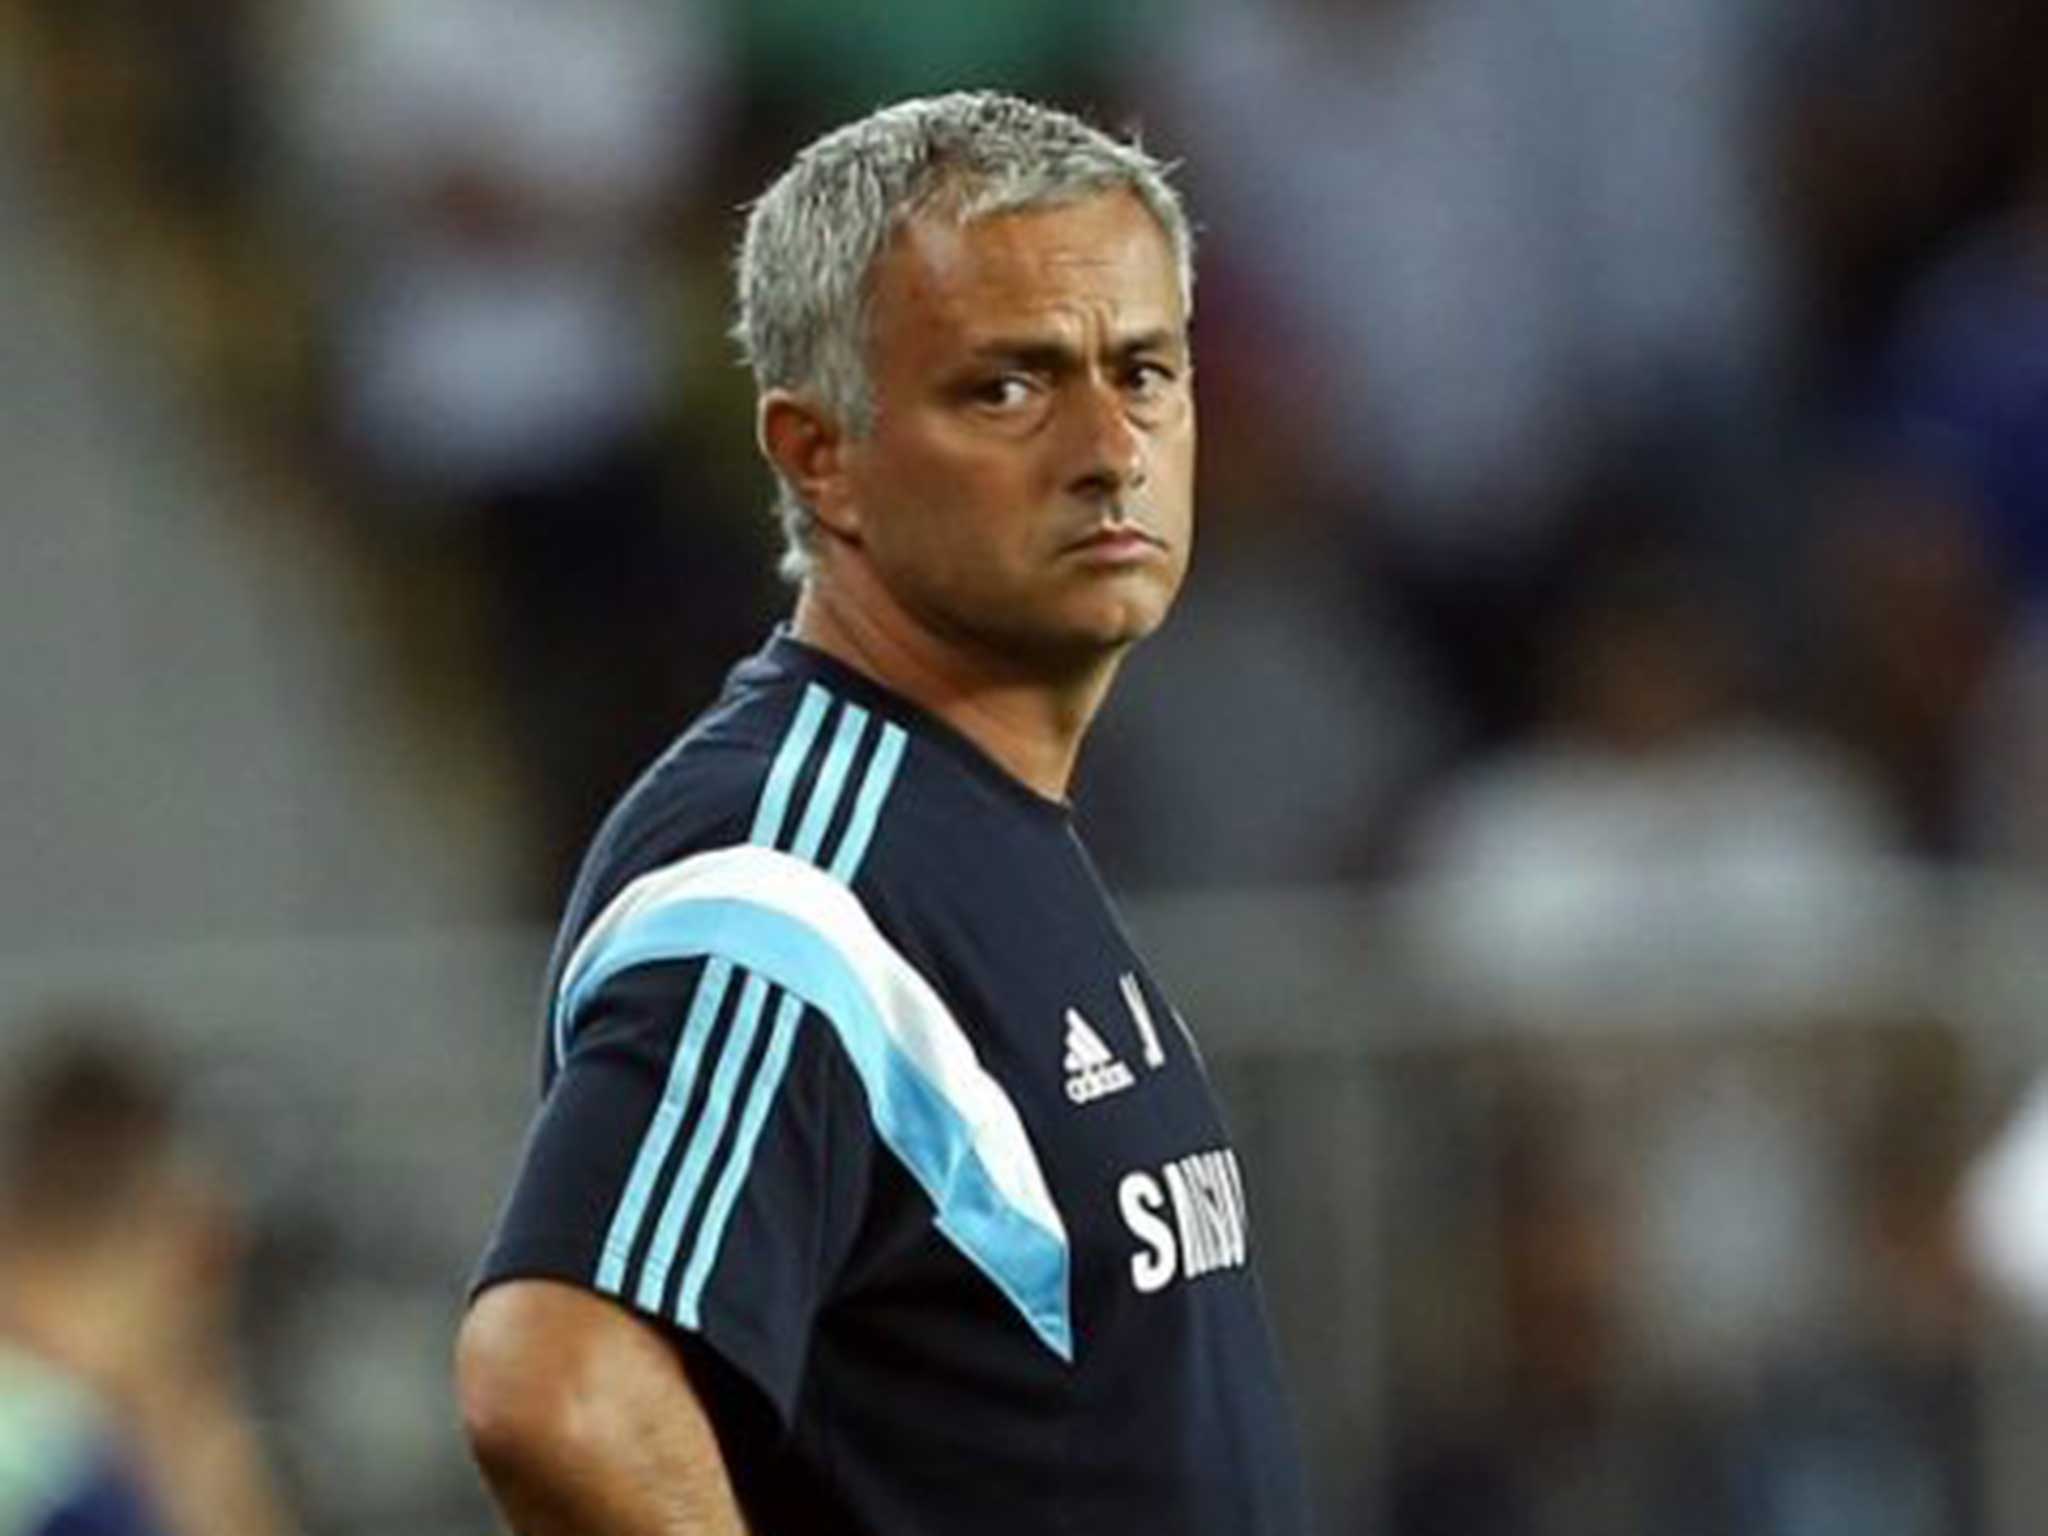 Crunch time: Jose Mourinho has gone three years without a league title